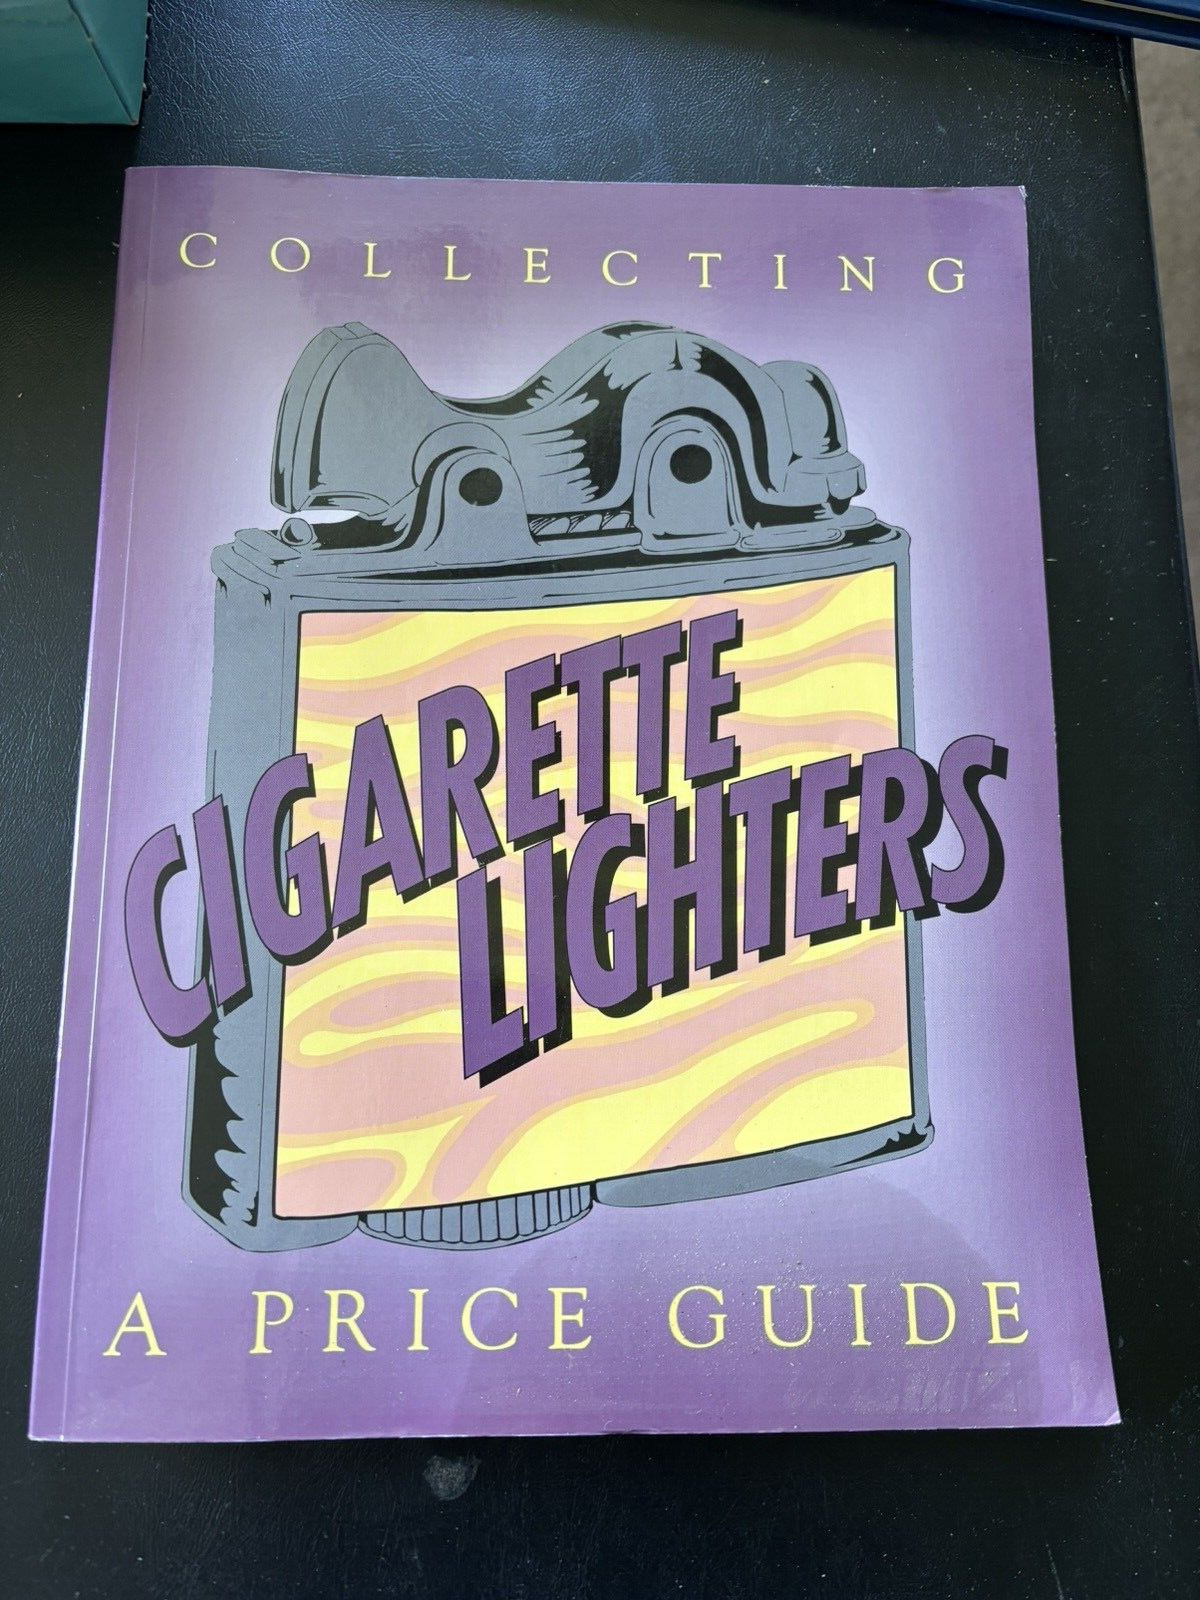 A Price Guide to Collecting Cigarette Lighters- Great Photos